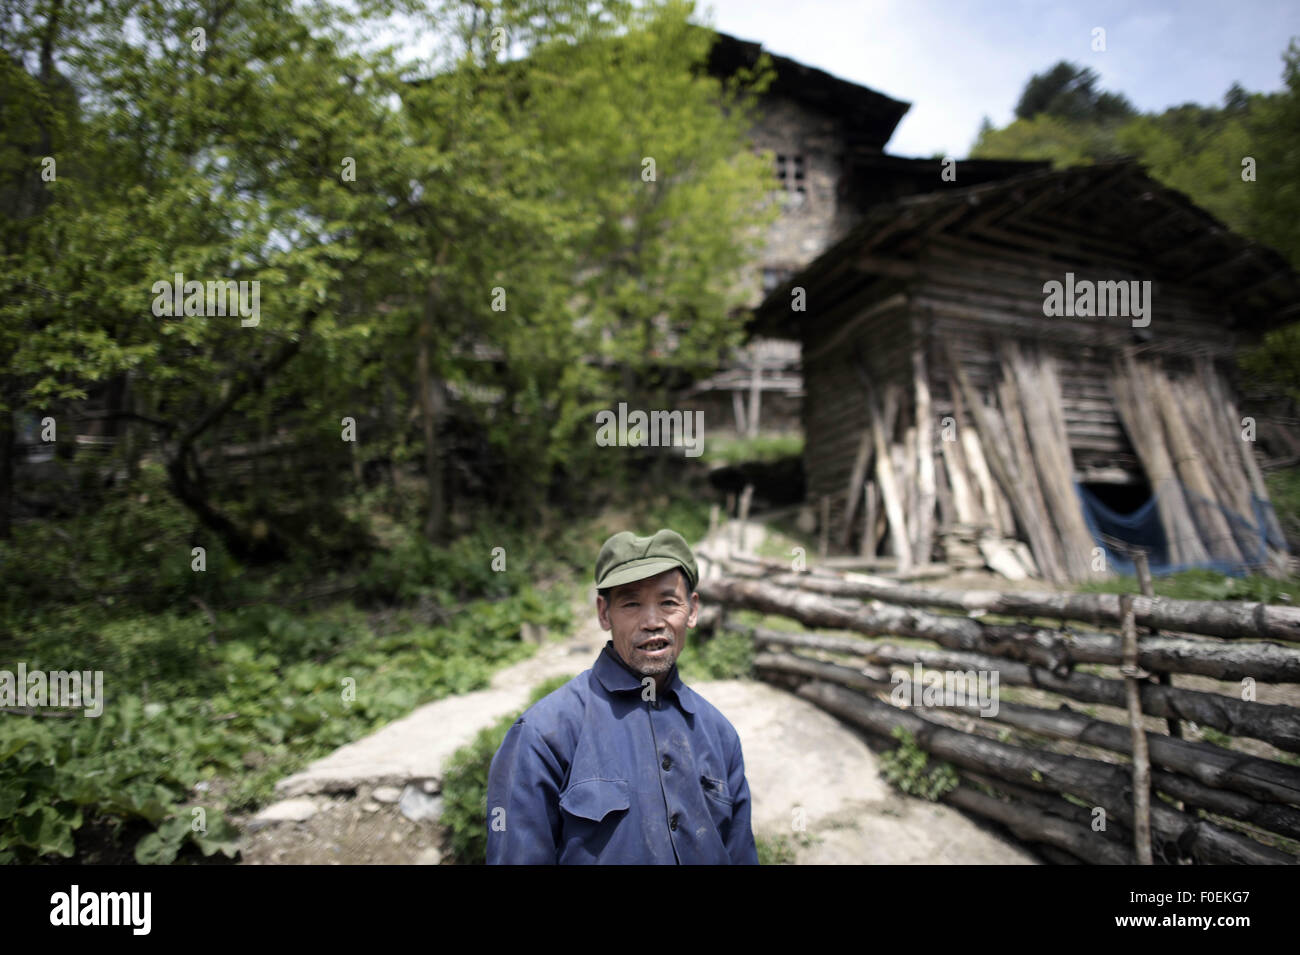 Chongqing, Chongqing, CHN. 7th May, 2015. Chongqing, CHINA - May 6 2015: (EDITORIAL USE ONLY. CHINA OUTï¼‰Grassy paths, farmland surrounded by hedge, Smoke and green forests''¦''¦Villagers live a happy life in wooden houses of Fangdouping Village Gaonan Town. © SIPA Asia/ZUMA Wire/Alamy Live News Stock Photo